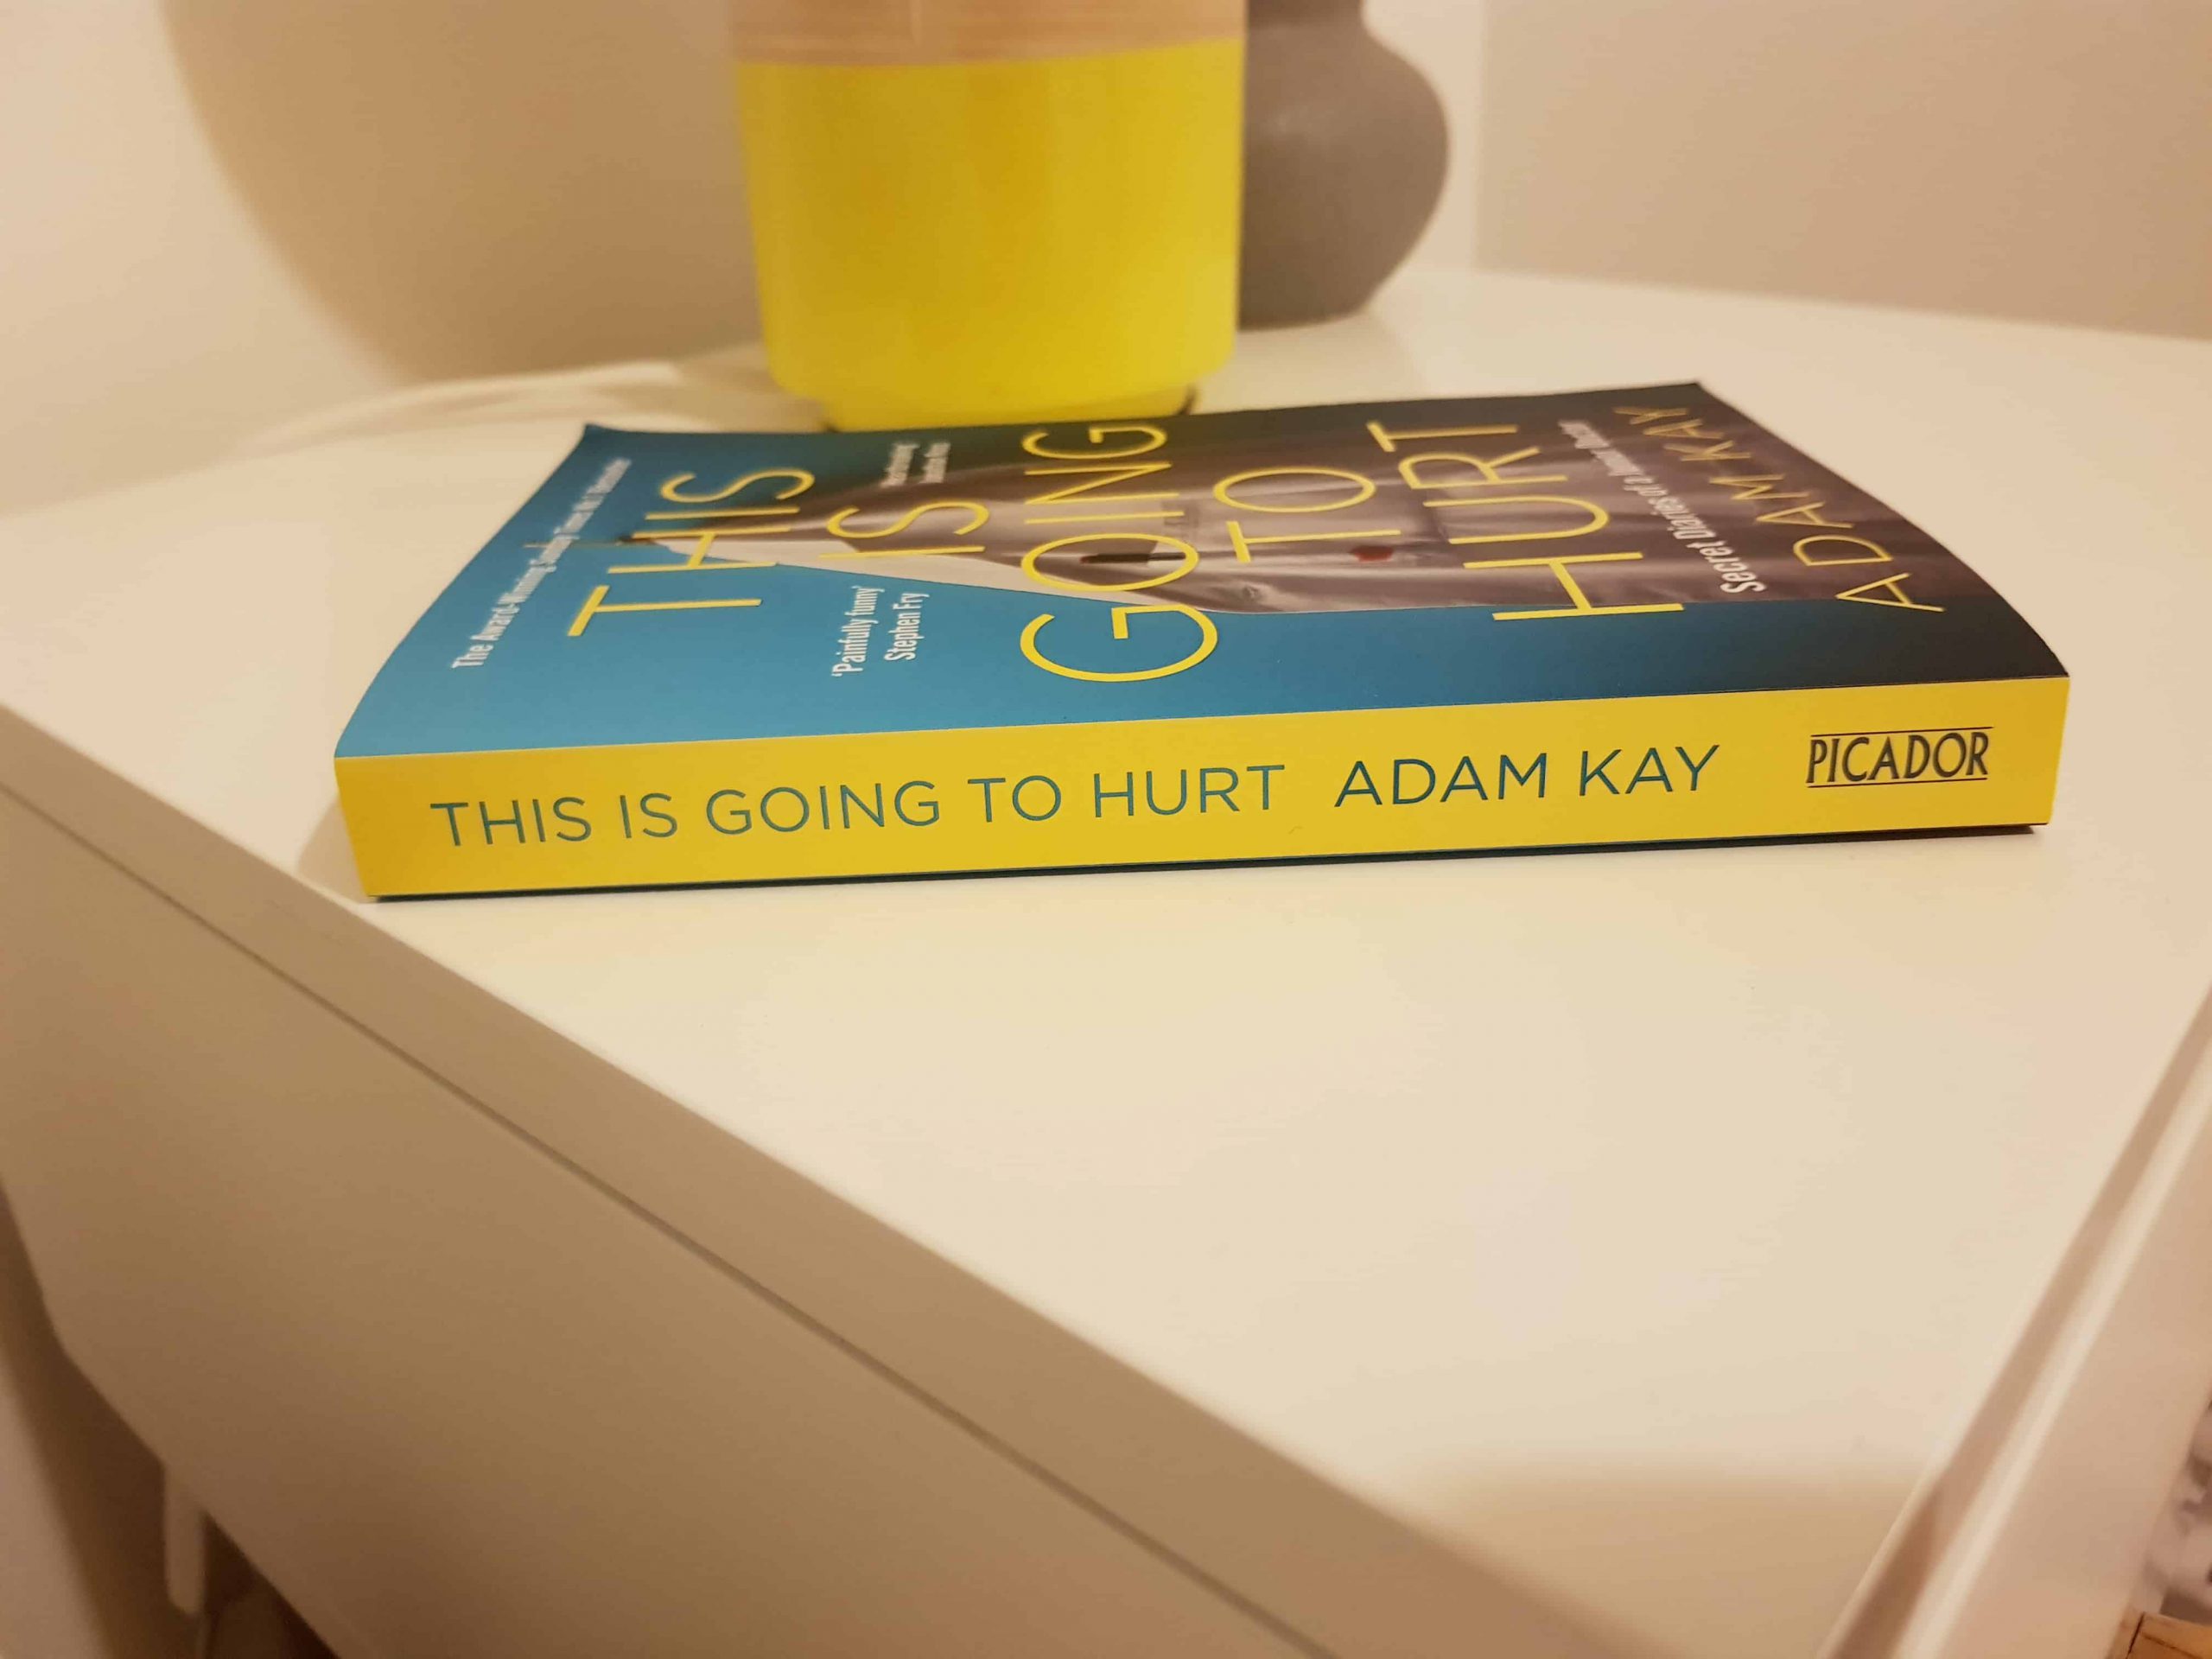 This is going to hurt - Adam Kay